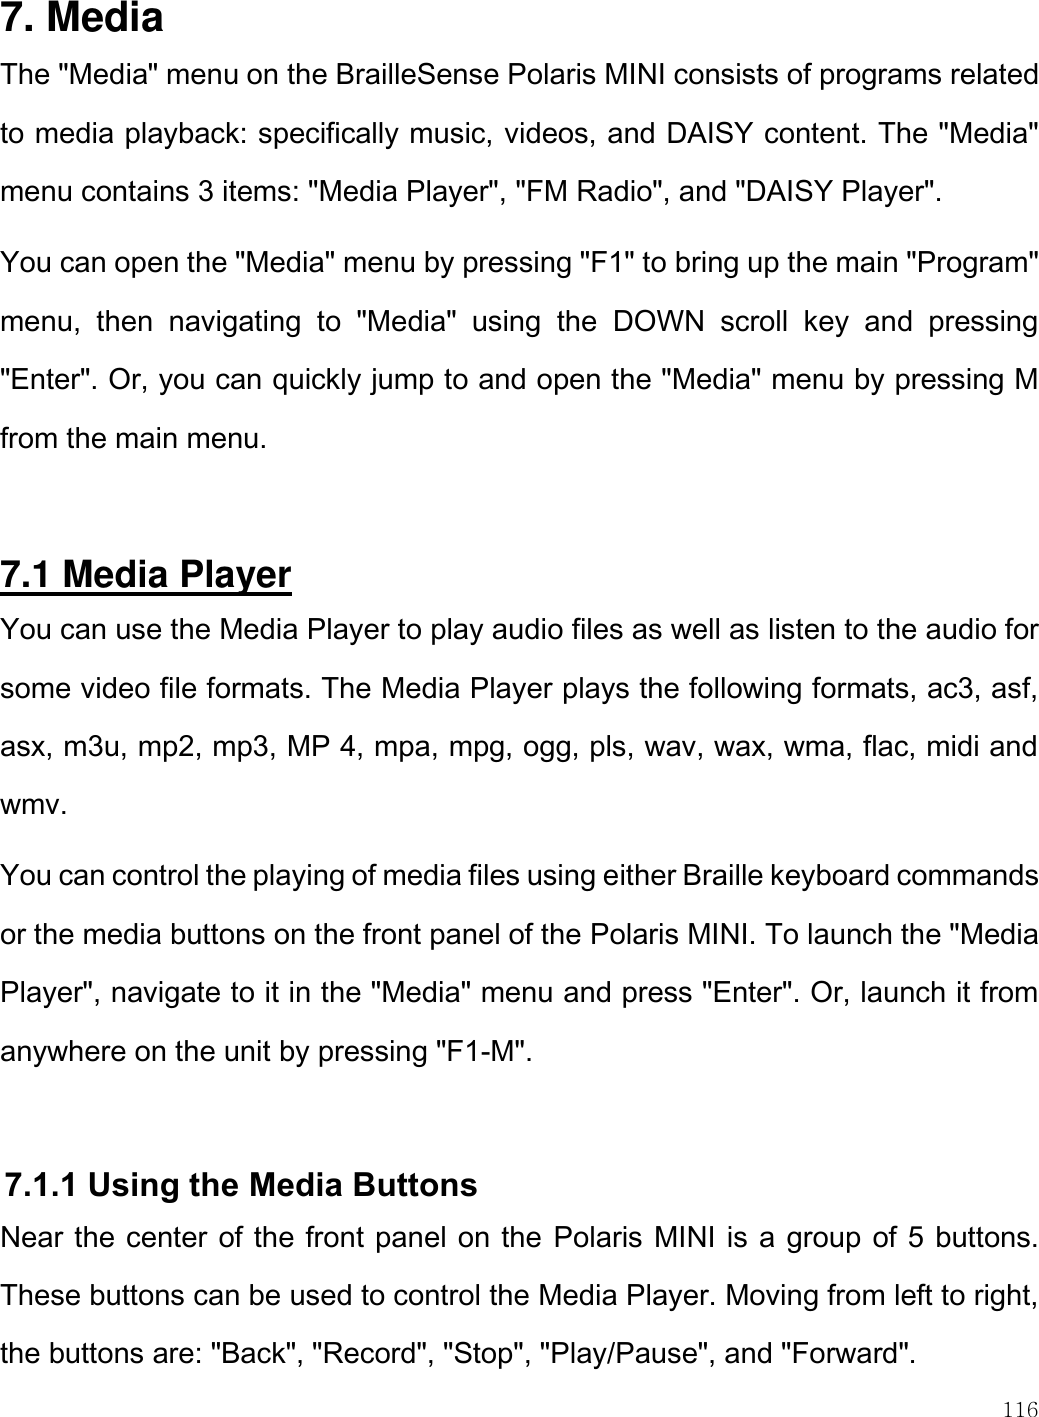    116  7. Media  The &quot;Media&quot; menu on the BrailleSense Polaris MINI consists of programs related to media playback: specifically music, videos, and DAISY content. The &quot;Media&quot; menu contains 3 items: &quot;Media Player&quot;, &quot;FM Radio&quot;, and &quot;DAISY Player&quot;.  You can open the &quot;Media&quot; menu by pressing &quot;F1&quot; to bring up the main &quot;Program&quot; menu,  then  navigating  to  &quot;Media&quot;  using  the  DOWN  scroll  key  and  pressing &quot;Enter&quot;. Or, you can quickly jump to and open the &quot;Media&quot; menu by pressing M from the main menu.  7.1 Media Player You can use the Media Player to play audio files as well as listen to the audio for some video file formats. The Media Player plays the following formats, ac3, asf, asx, m3u, mp2, mp3, MP 4, mpa, mpg, ogg, pls, wav, wax, wma, flac, midi and wmv.  You can control the playing of media files using either Braille keyboard commands or the media buttons on the front panel of the Polaris MINI. To launch the &quot;Media Player&quot;, navigate to it in the &quot;Media&quot; menu and press &quot;Enter&quot;. Or, launch it from anywhere on the unit by pressing &quot;F1-M&quot;.  7.1.1 Using the Media Buttons Near the center of the front panel on the Polaris MINI is a group of 5 buttons. These buttons can be used to control the Media Player. Moving from left to right, the buttons are: &quot;Back&quot;, &quot;Record&quot;, &quot;Stop&quot;, &quot;Play/Pause&quot;, and &quot;Forward&quot;.  